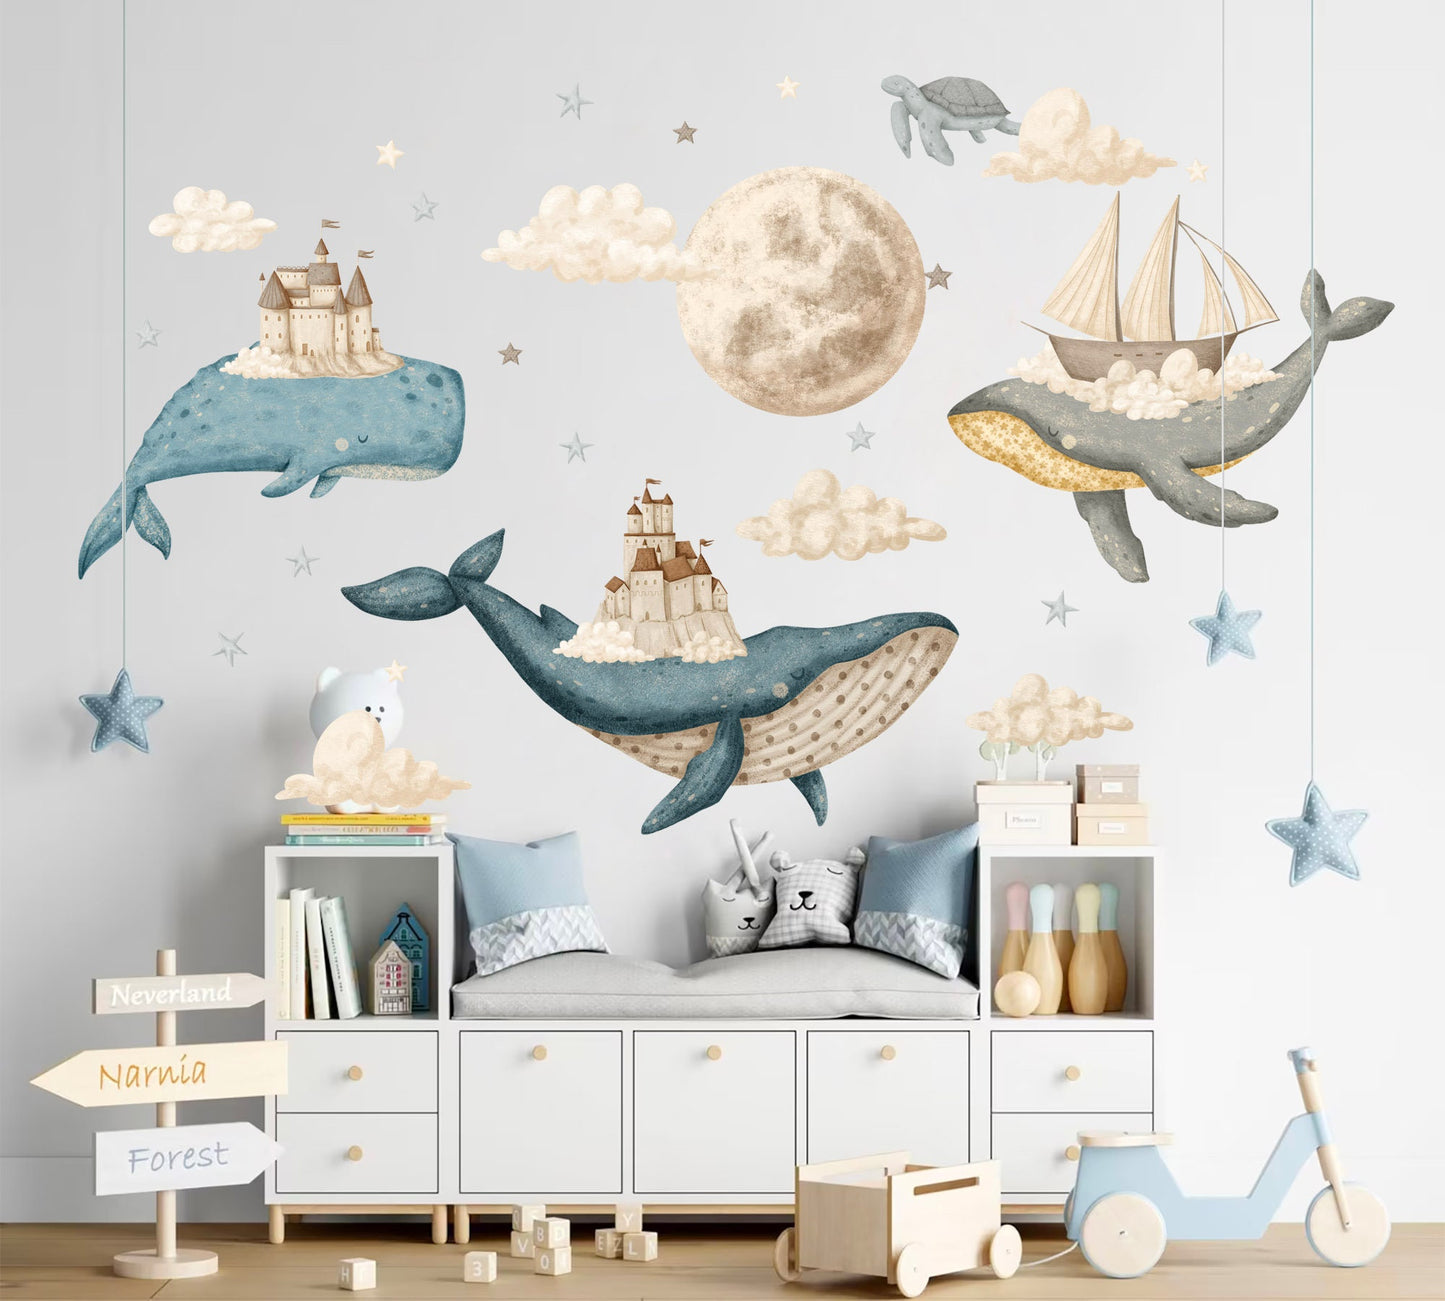 Whimsical Whale Sky Castle Wall Decal - Watercolor Moon Room Decor - BR385